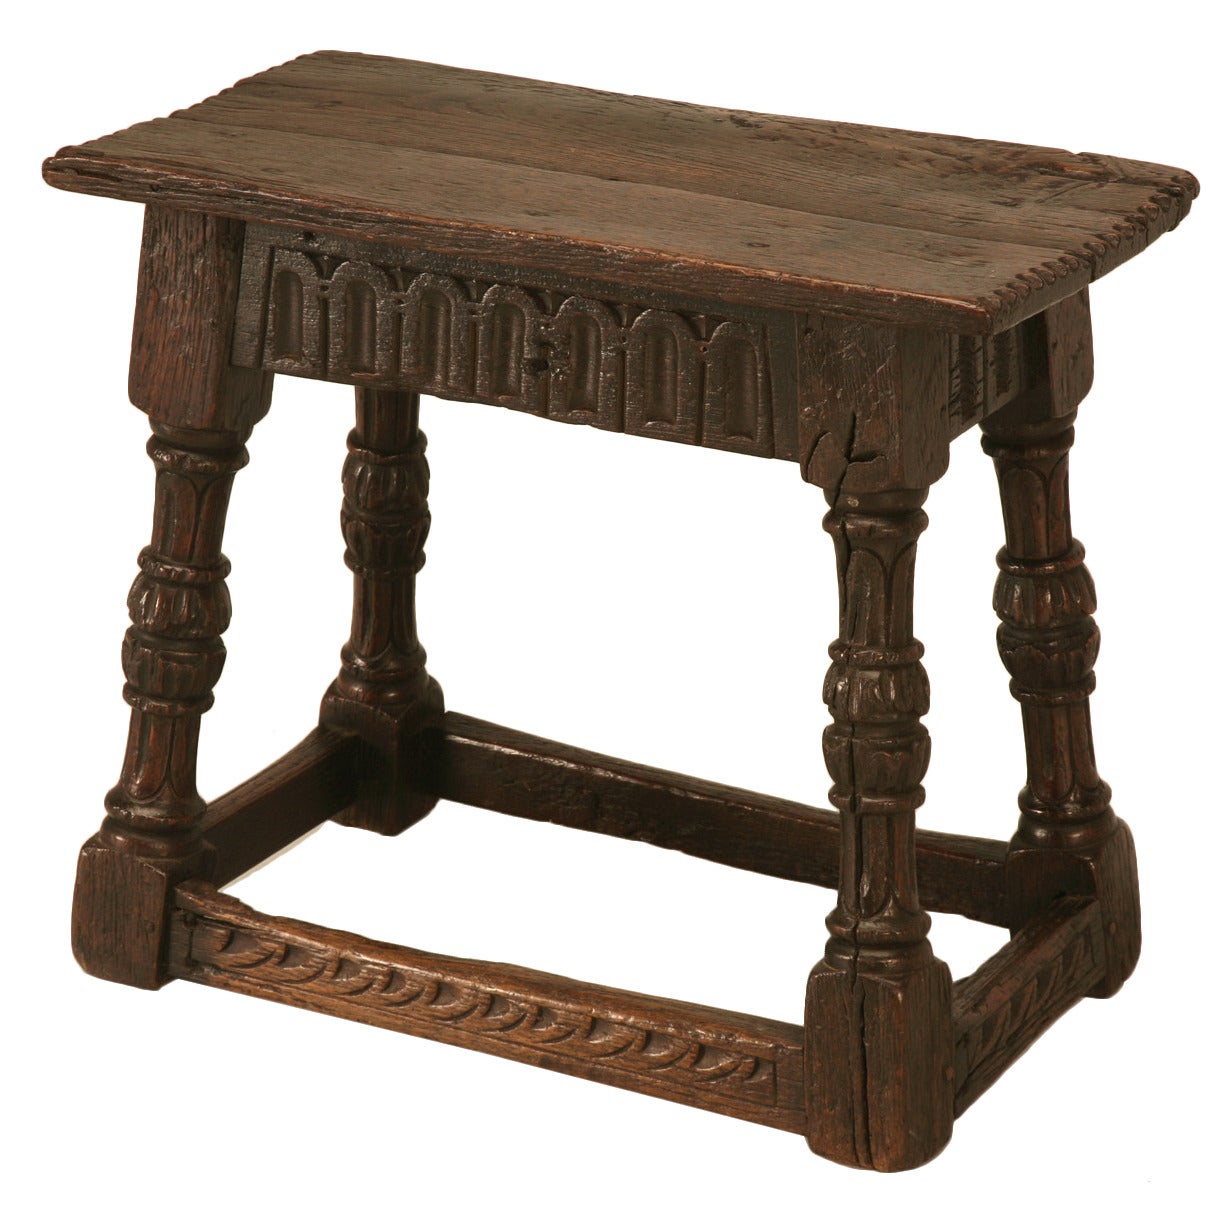 Original 17th C. Antique English Oak Bench or Stool with Carved Aprons and Stretchers